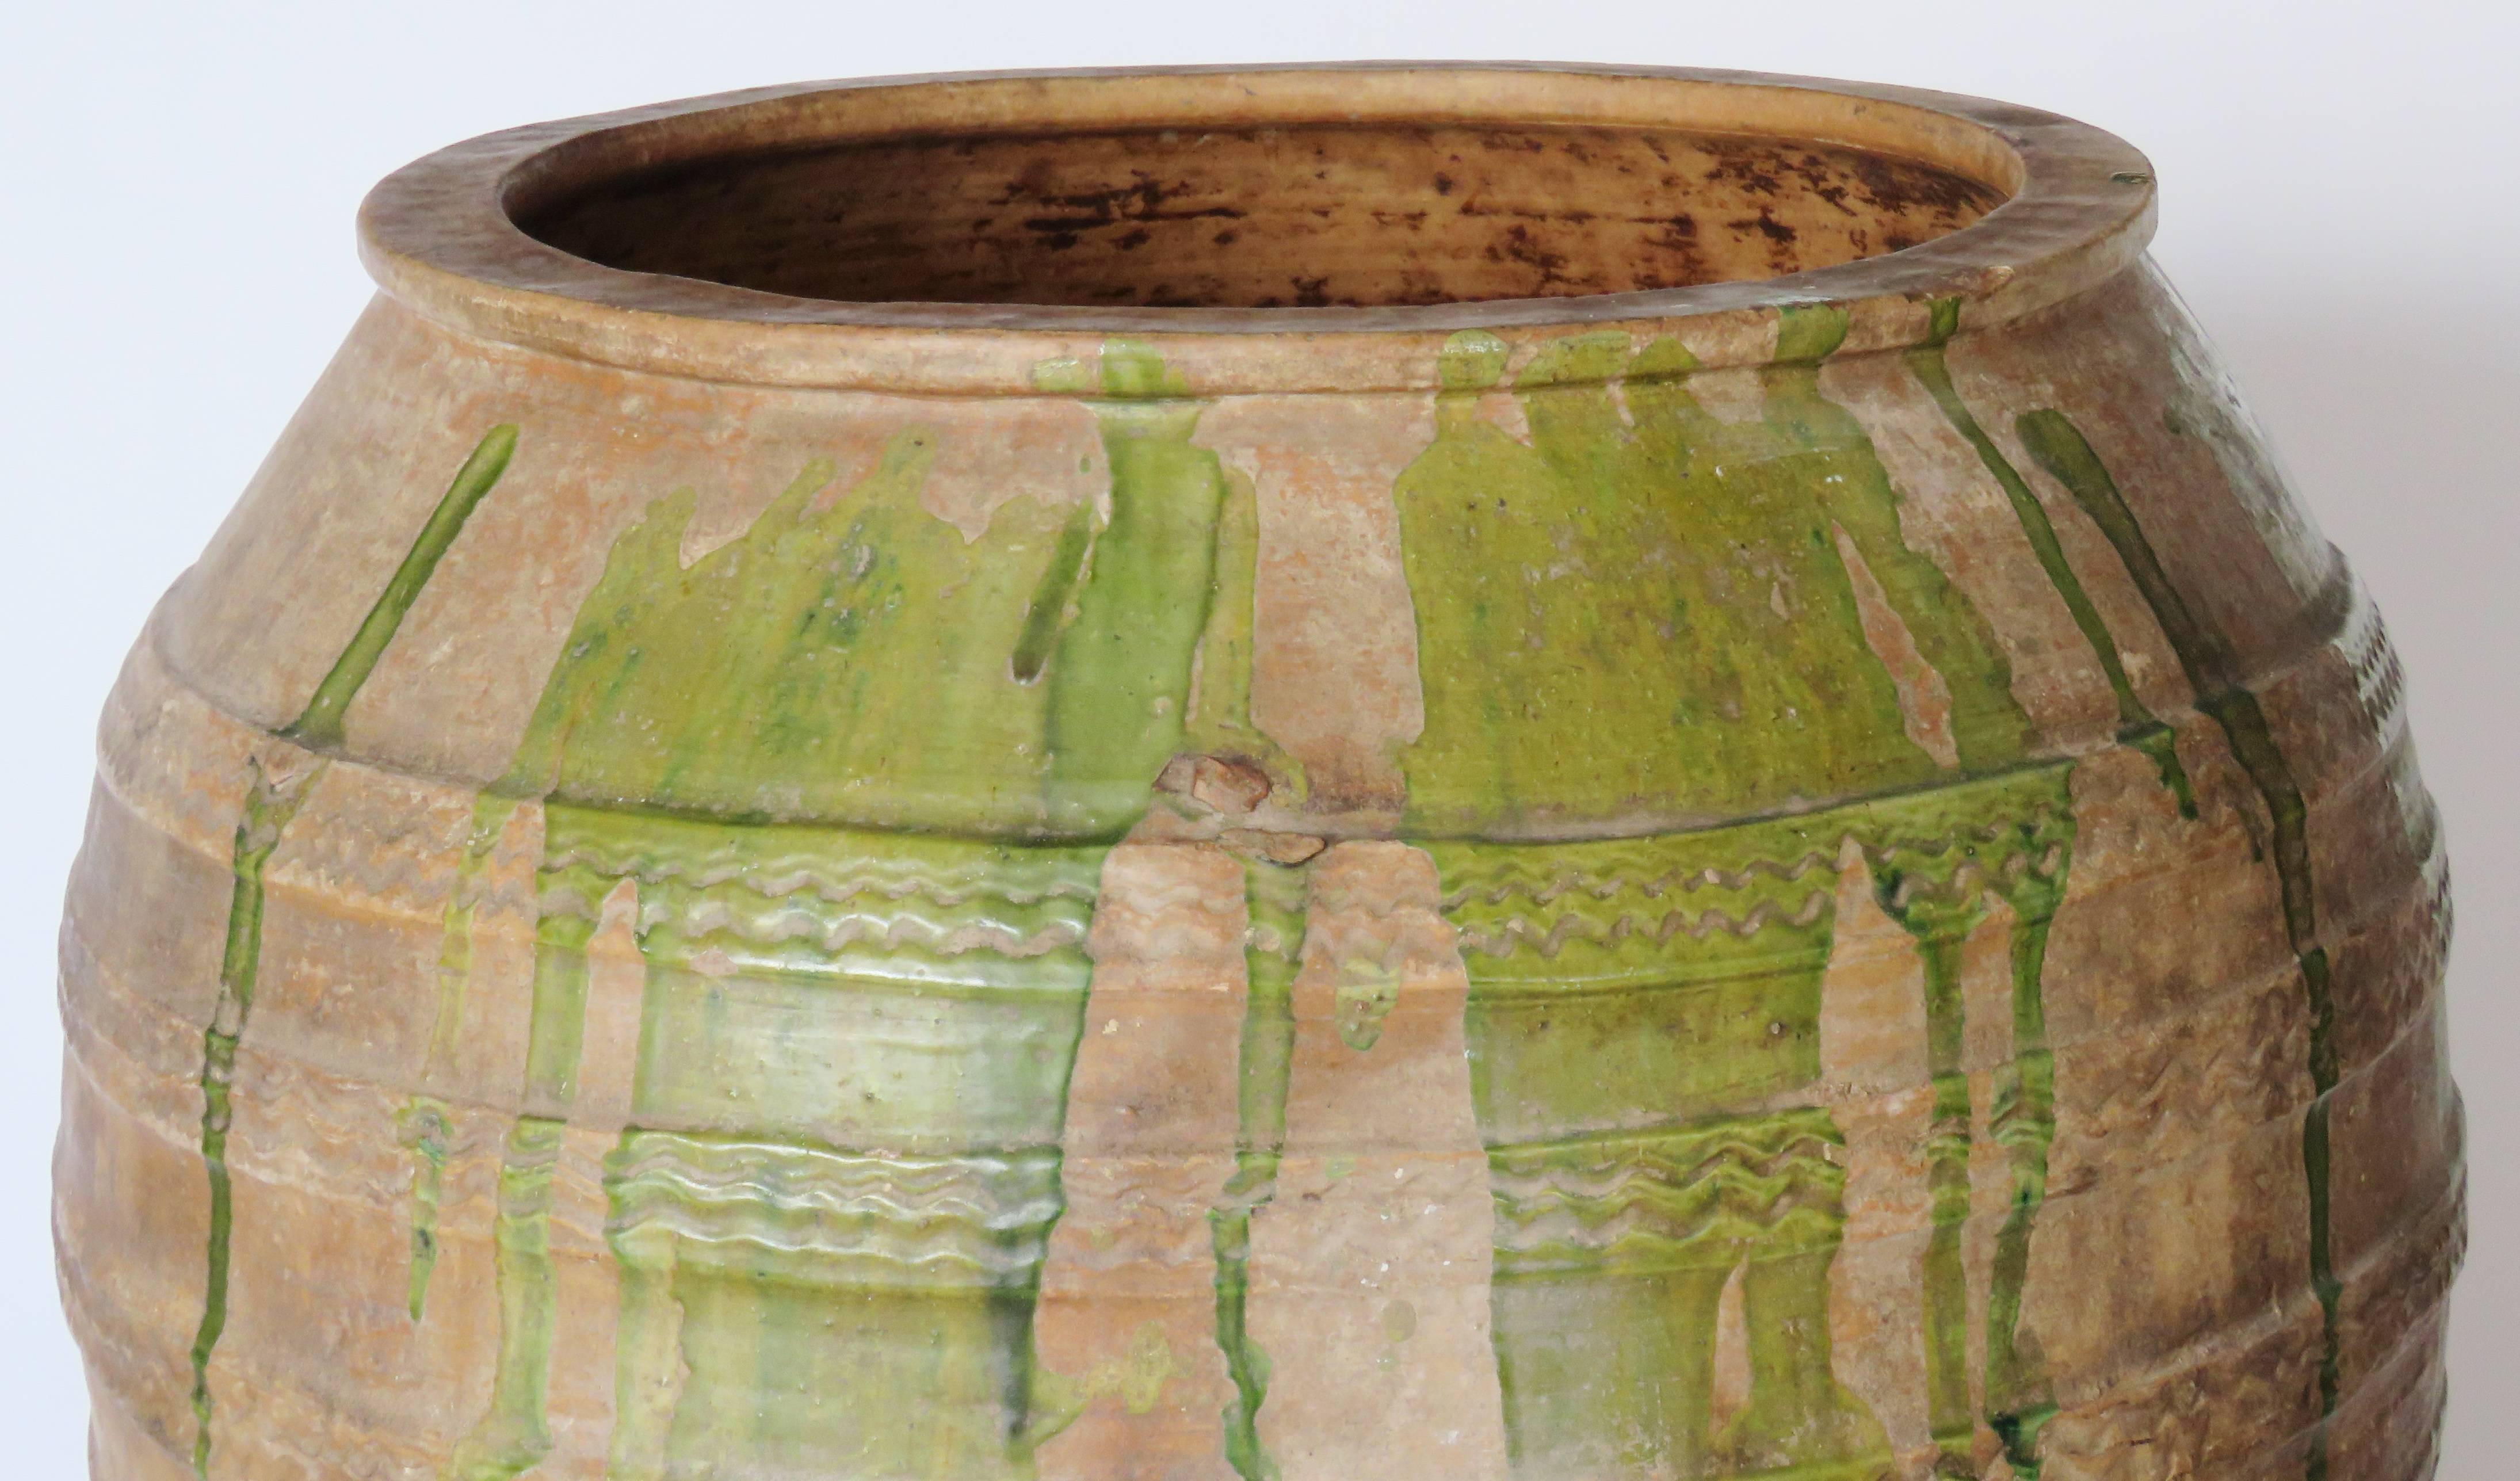 Hand coiled ceramic jar with horizontal ridging zig-zag design and olive green. Beautiful patina. Mouth: 17 1/4